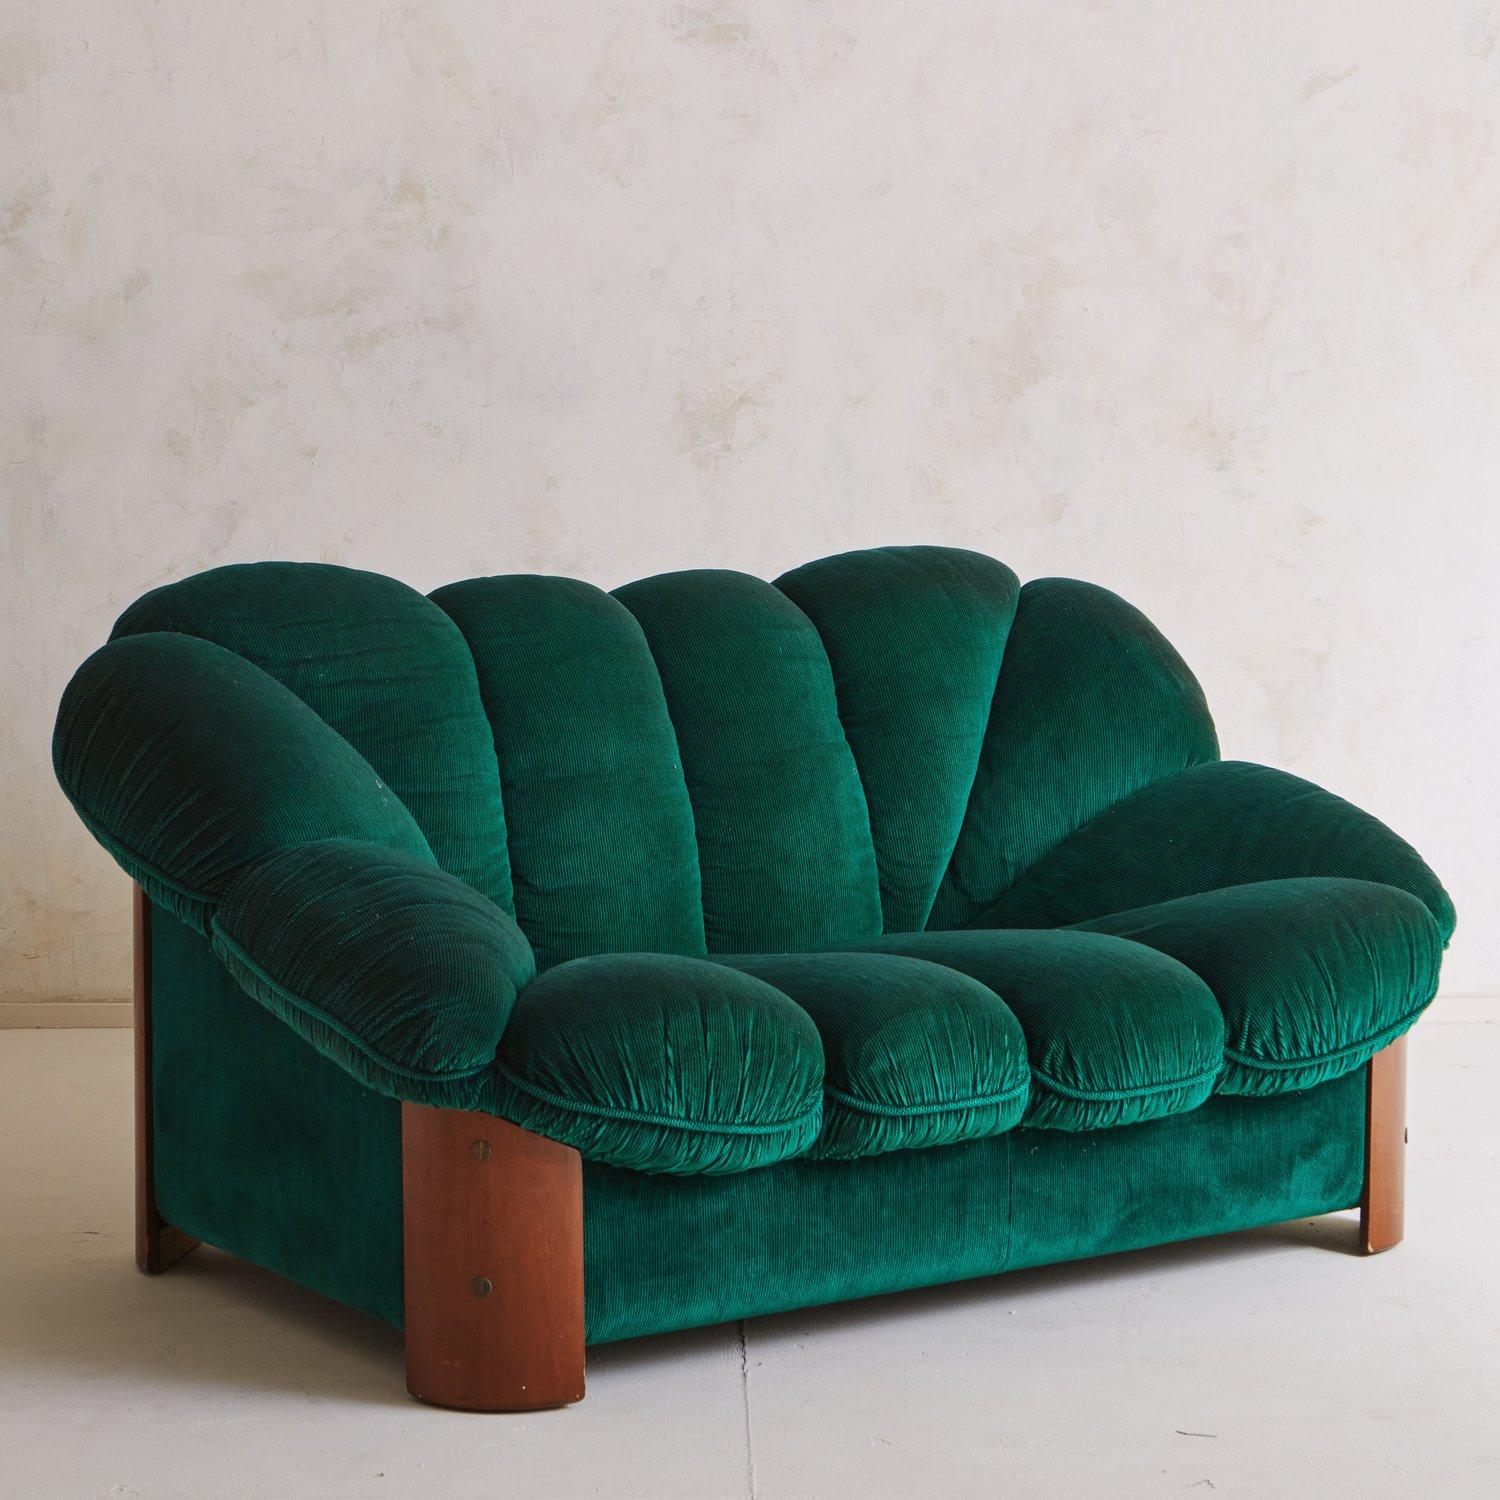 A vintage loveseat with a striking scalloped profile in original green velvet upholstery. This statement piece sits just off the ground on four curved cherry wood legs with sleek wood joinery. In the style of seating by designer Raphael Raffel.